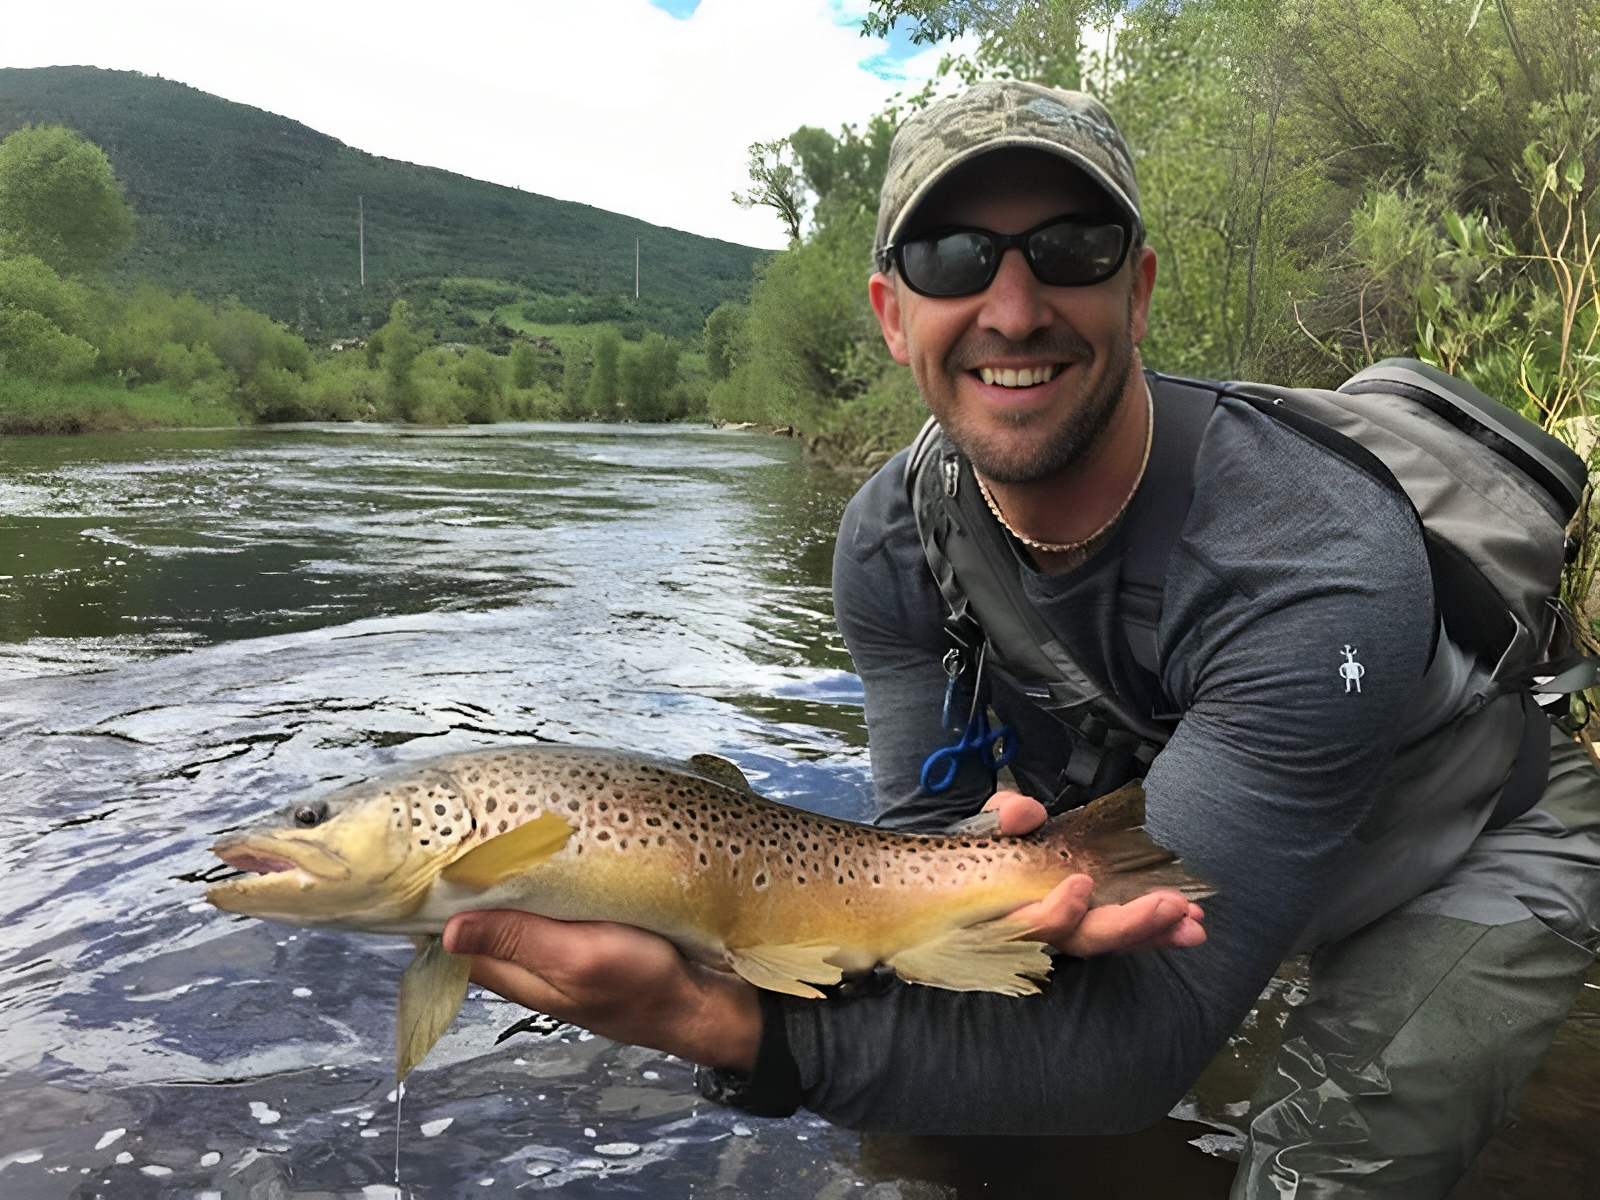 365 Fly Fishing Tips For Trout, Bass & Panfish at The Fly Shop